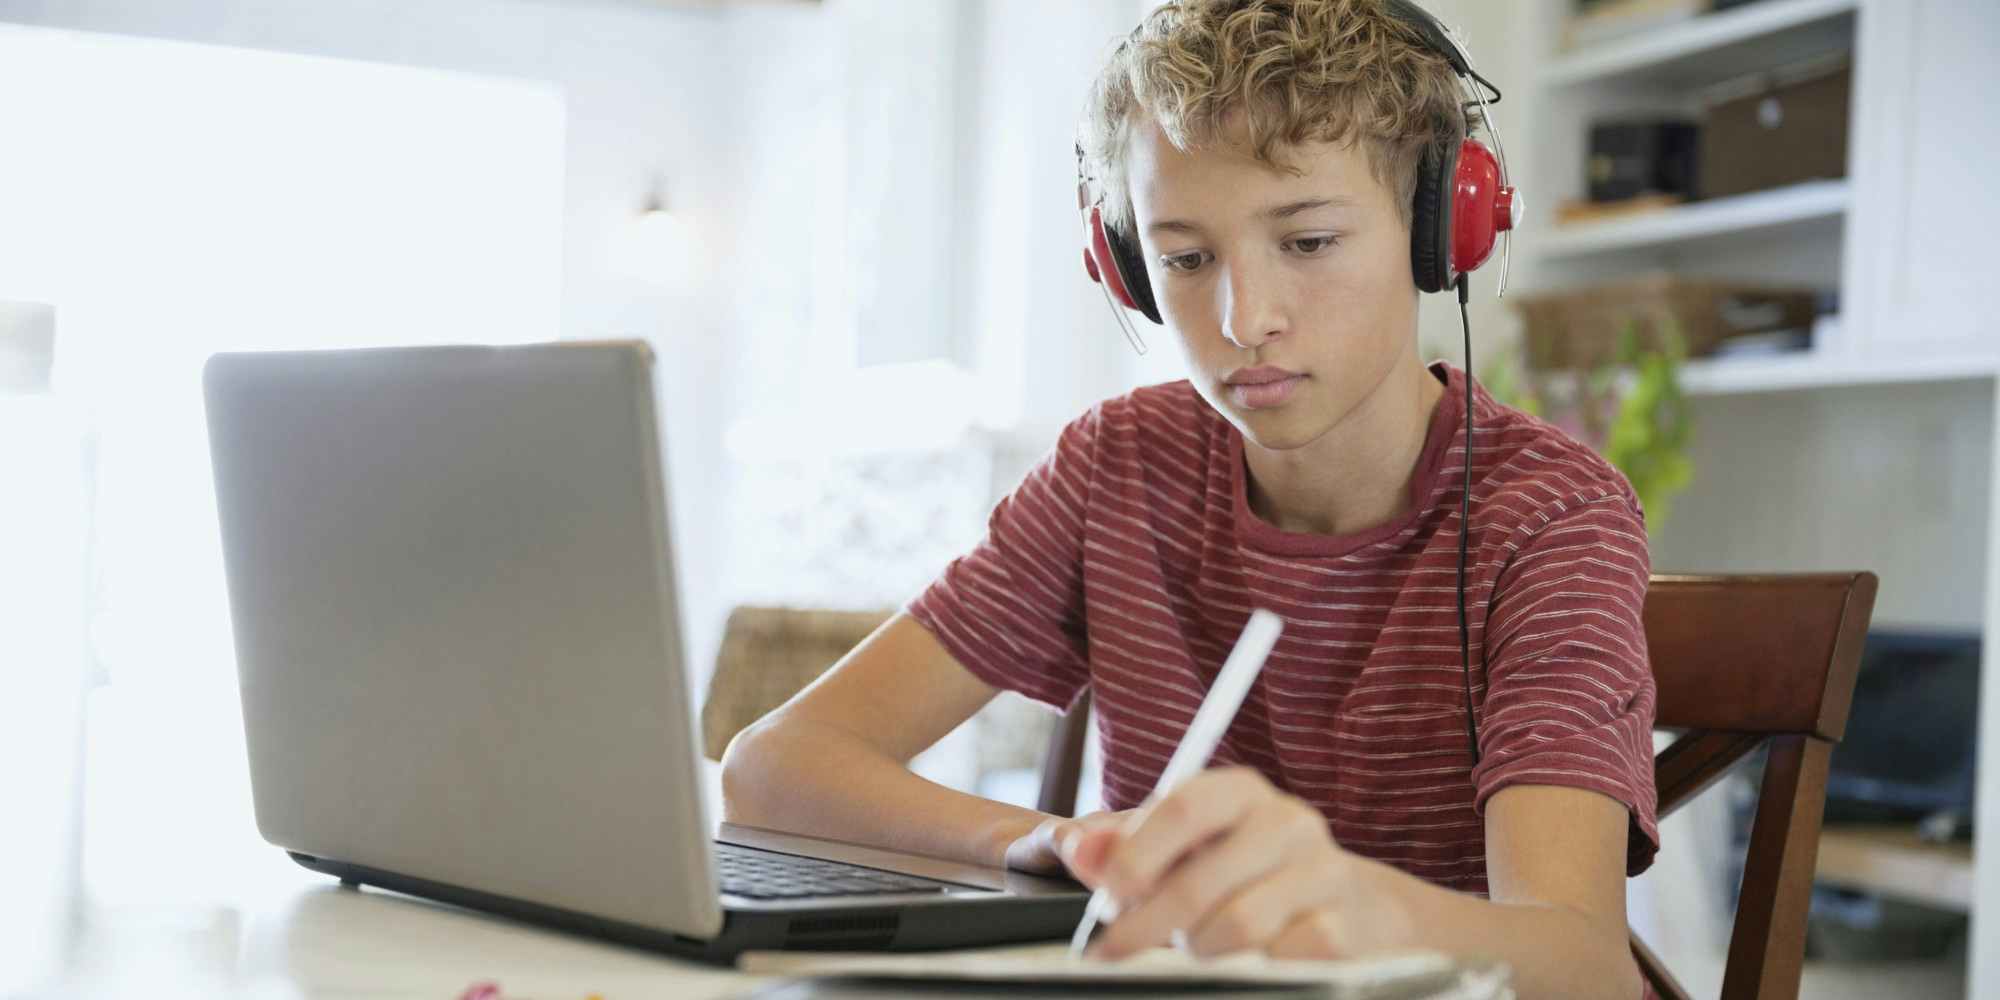 A teenager with headphones on sitting in front of a laptop and writing on a notepad.